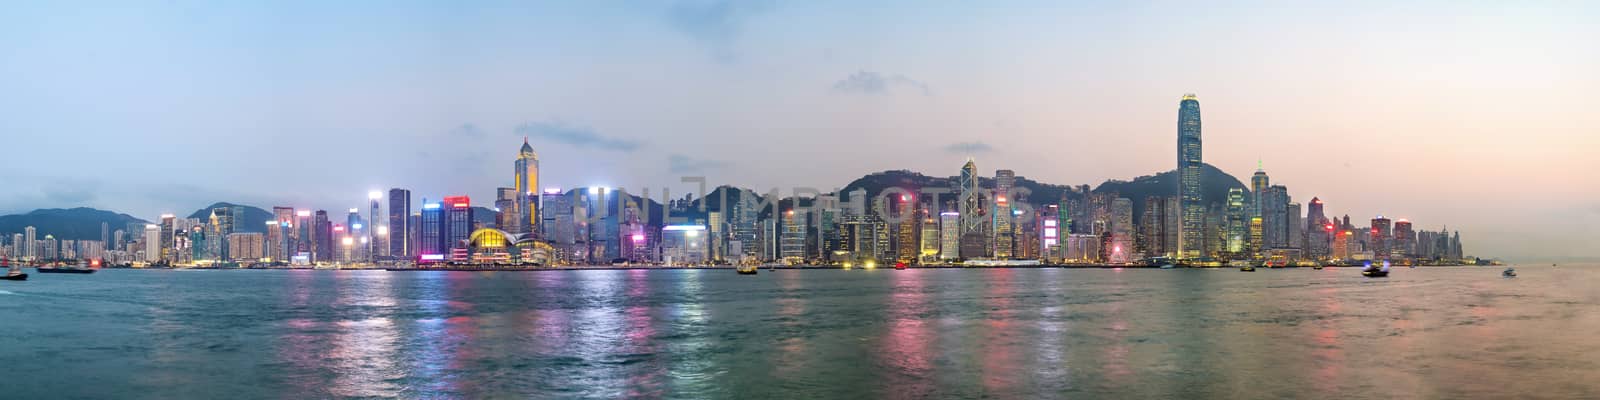 Panorama view of Hong Kong skyline on the evening seen from Kowloon. by Tanarch